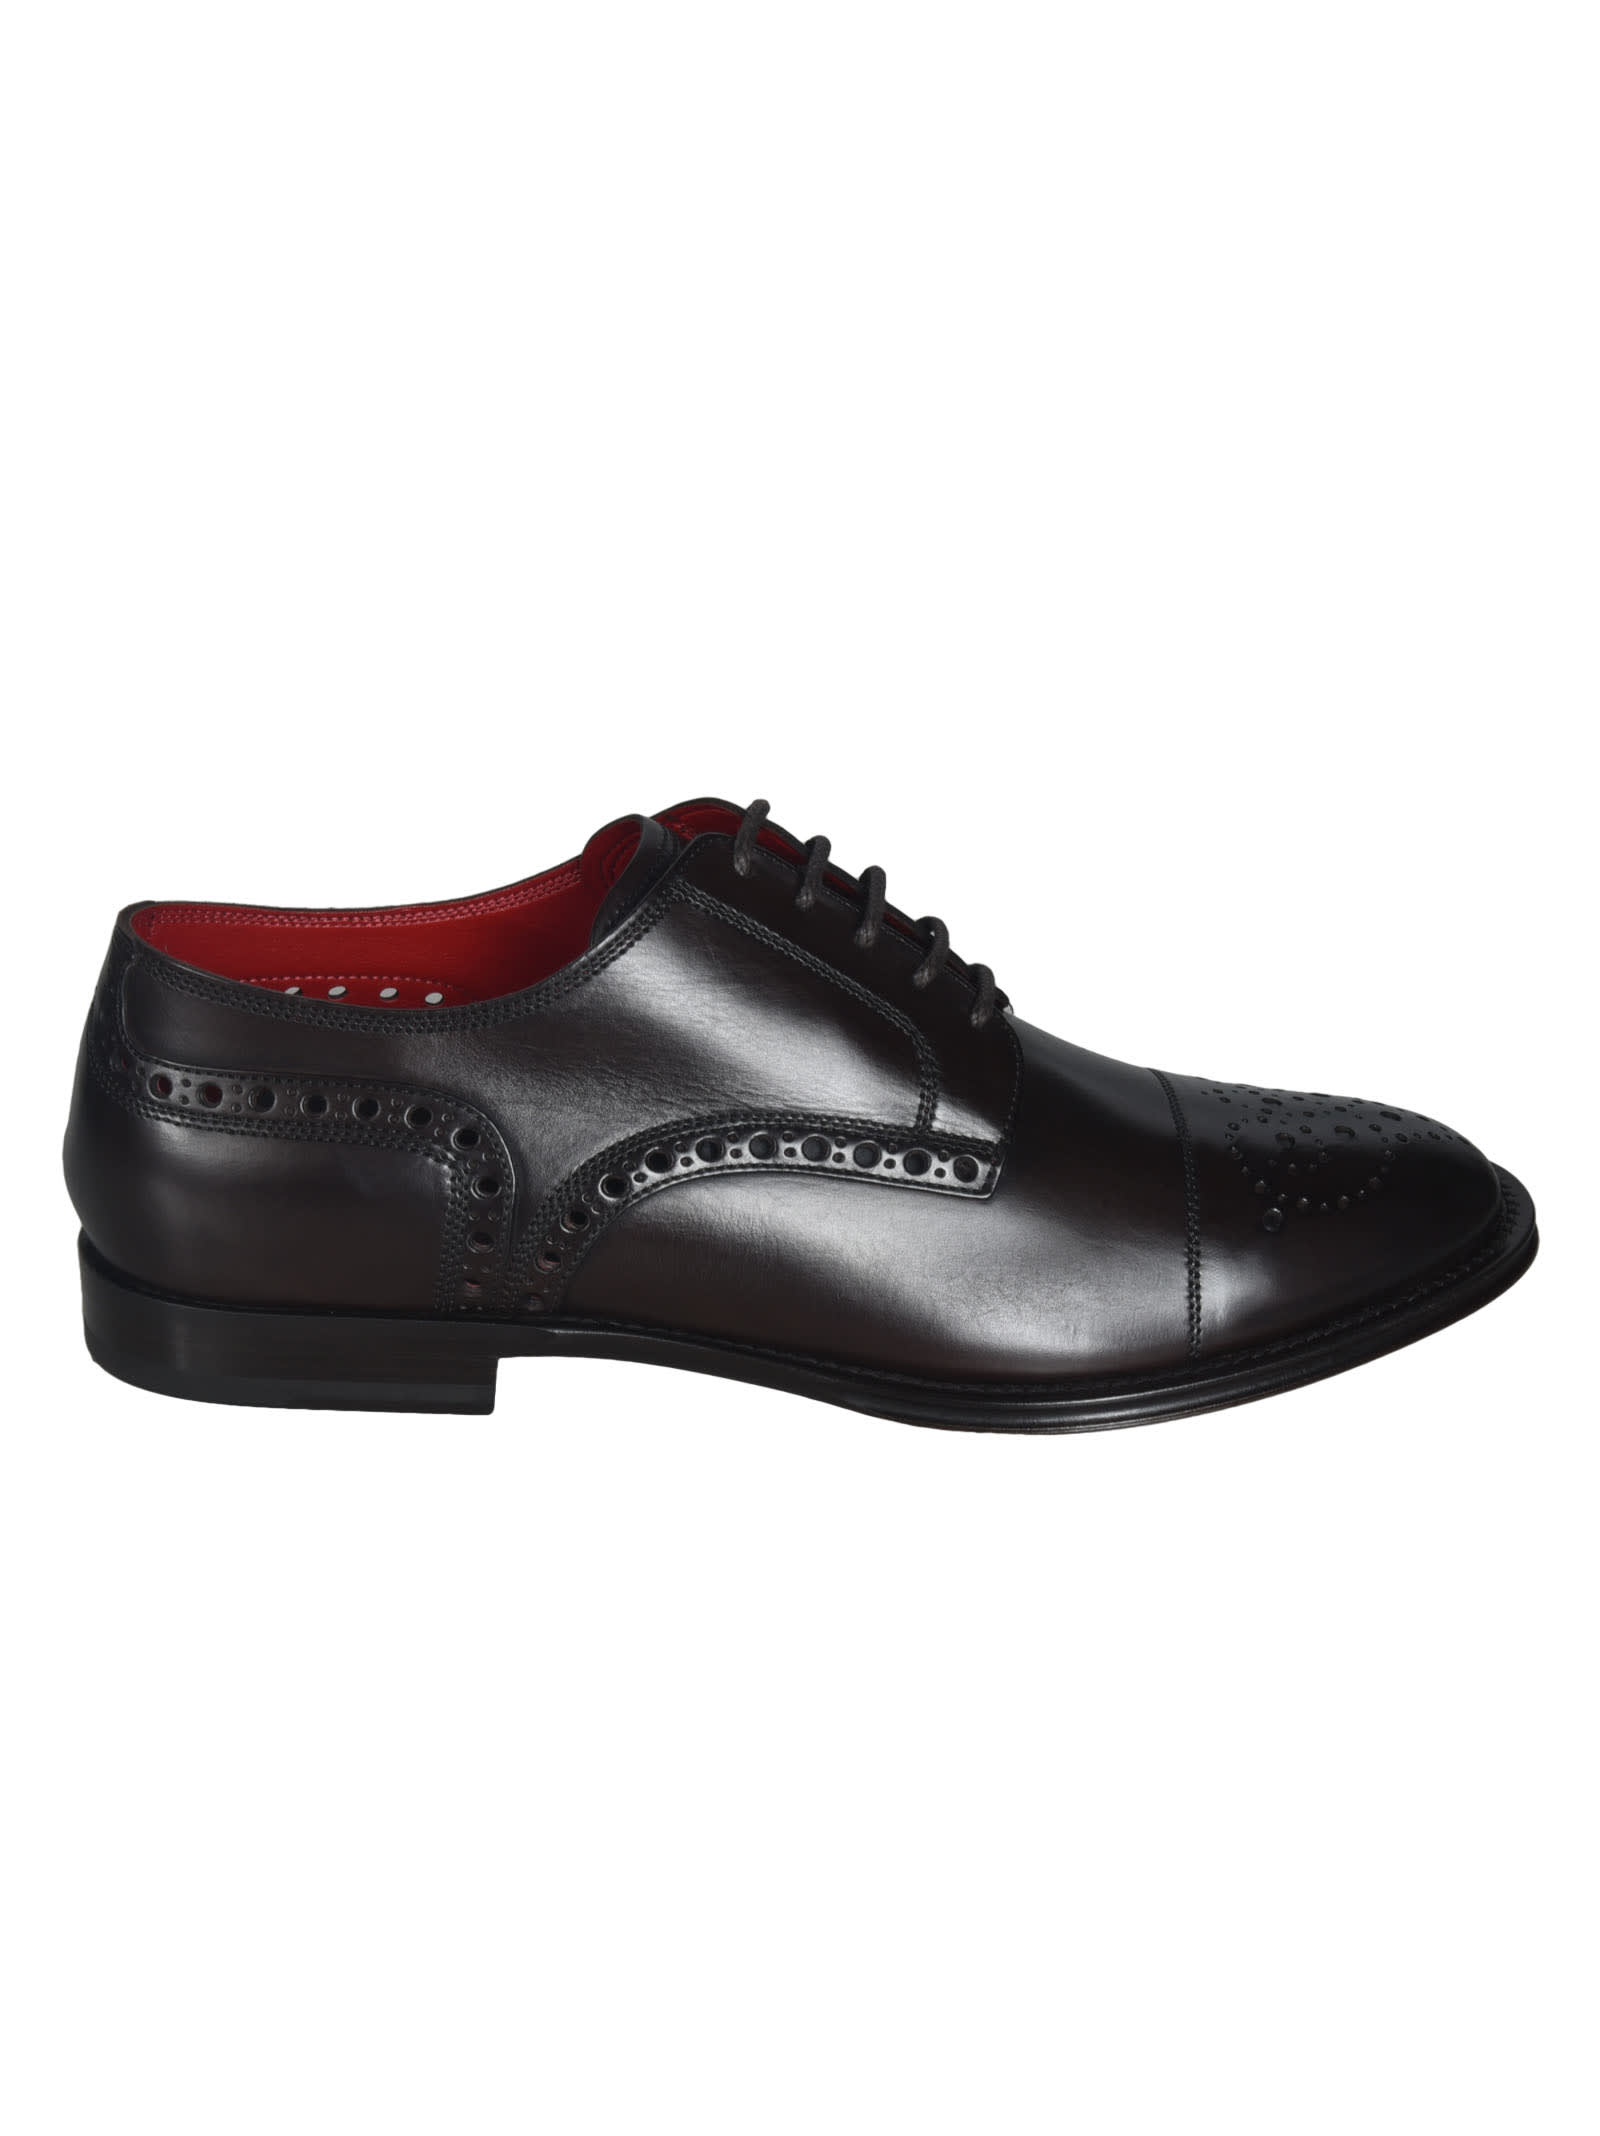 Dolce & Gabbana Classic Perforated Oxford Shoes In Brown